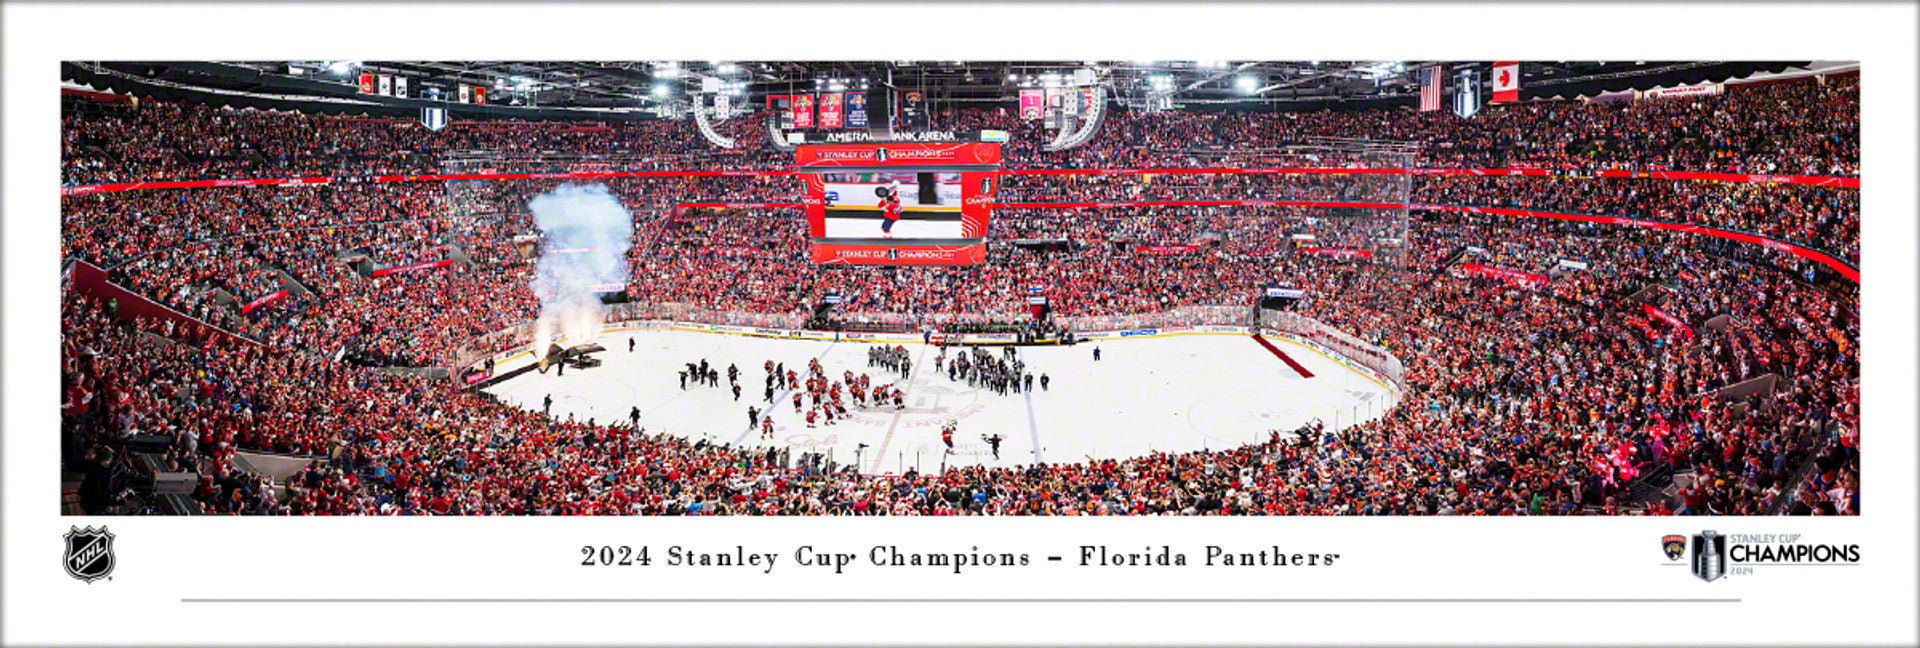 Florida Panthers 2024 Stanley Cup Champions Unframed Panoramic Picture - 13.5 x 40